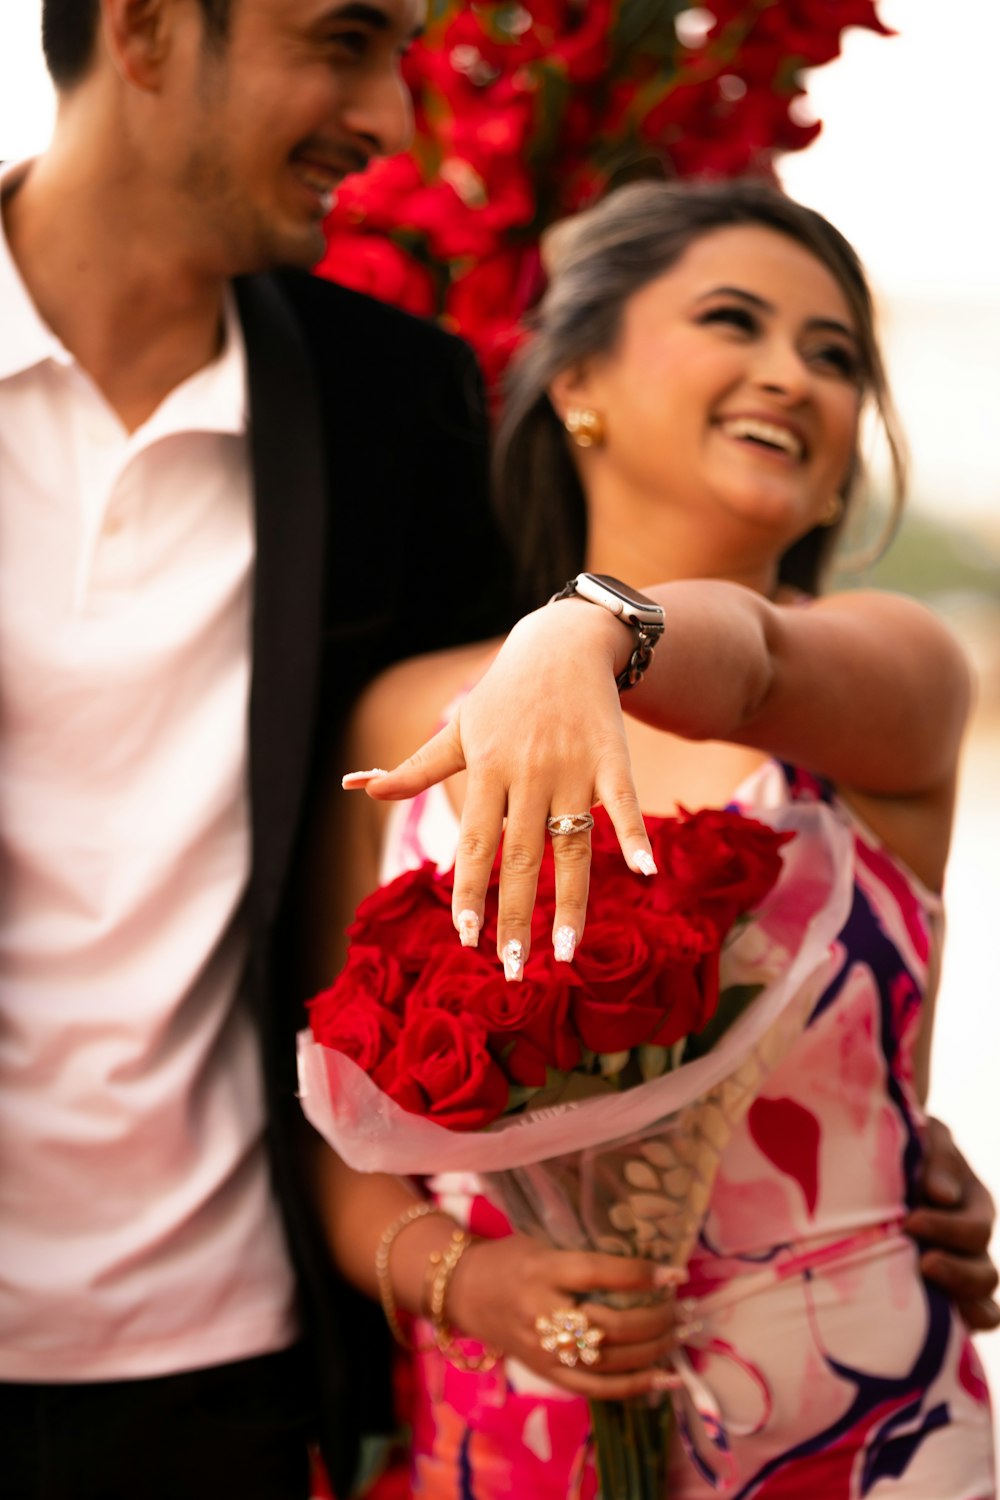 a man holding a bouquet of red roses next to a woman